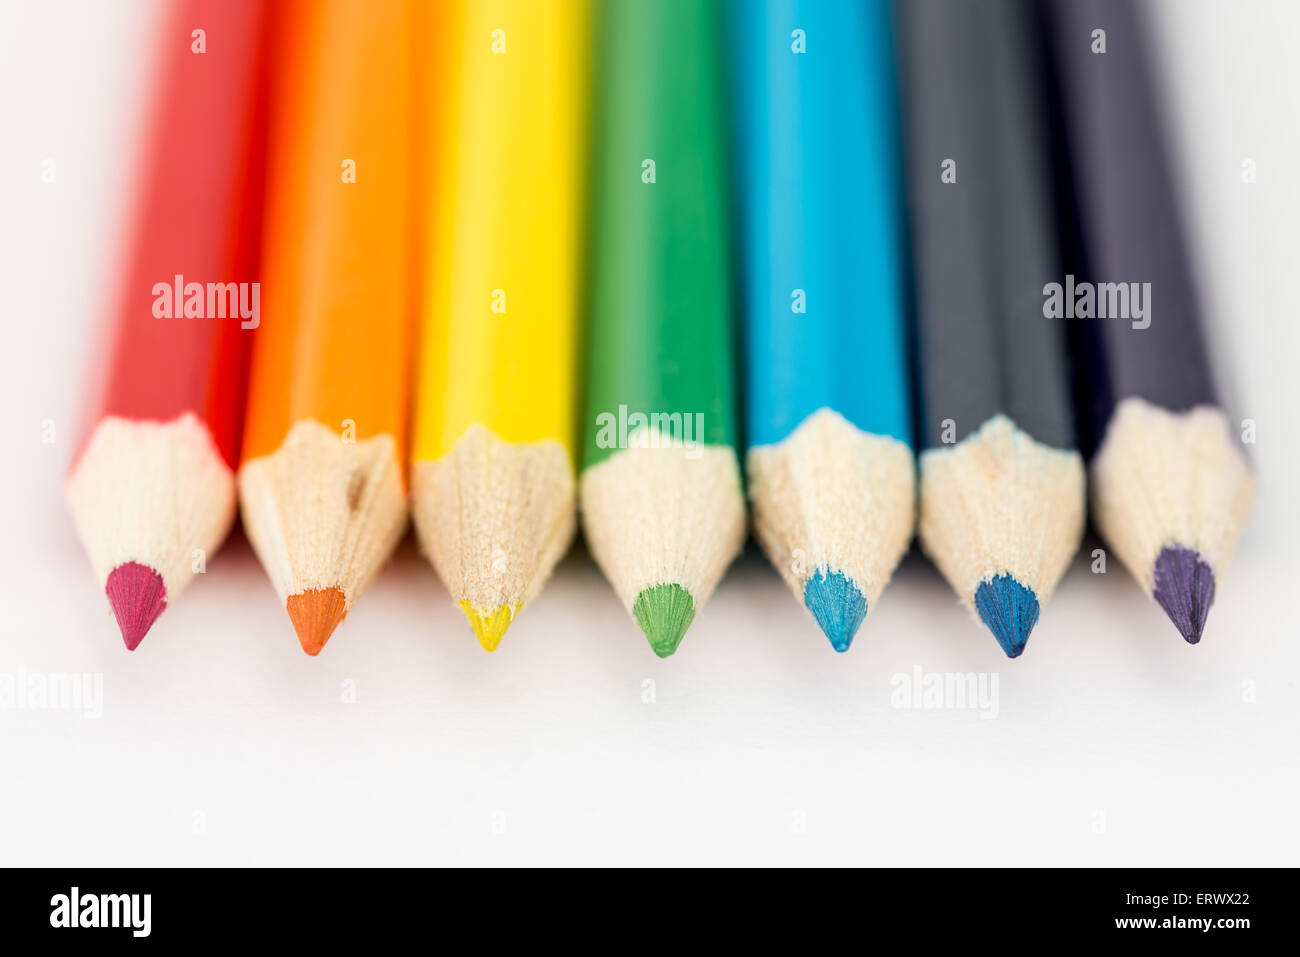 Red, Orange, Yellow, Green and blue pencils in a row Stock Photo